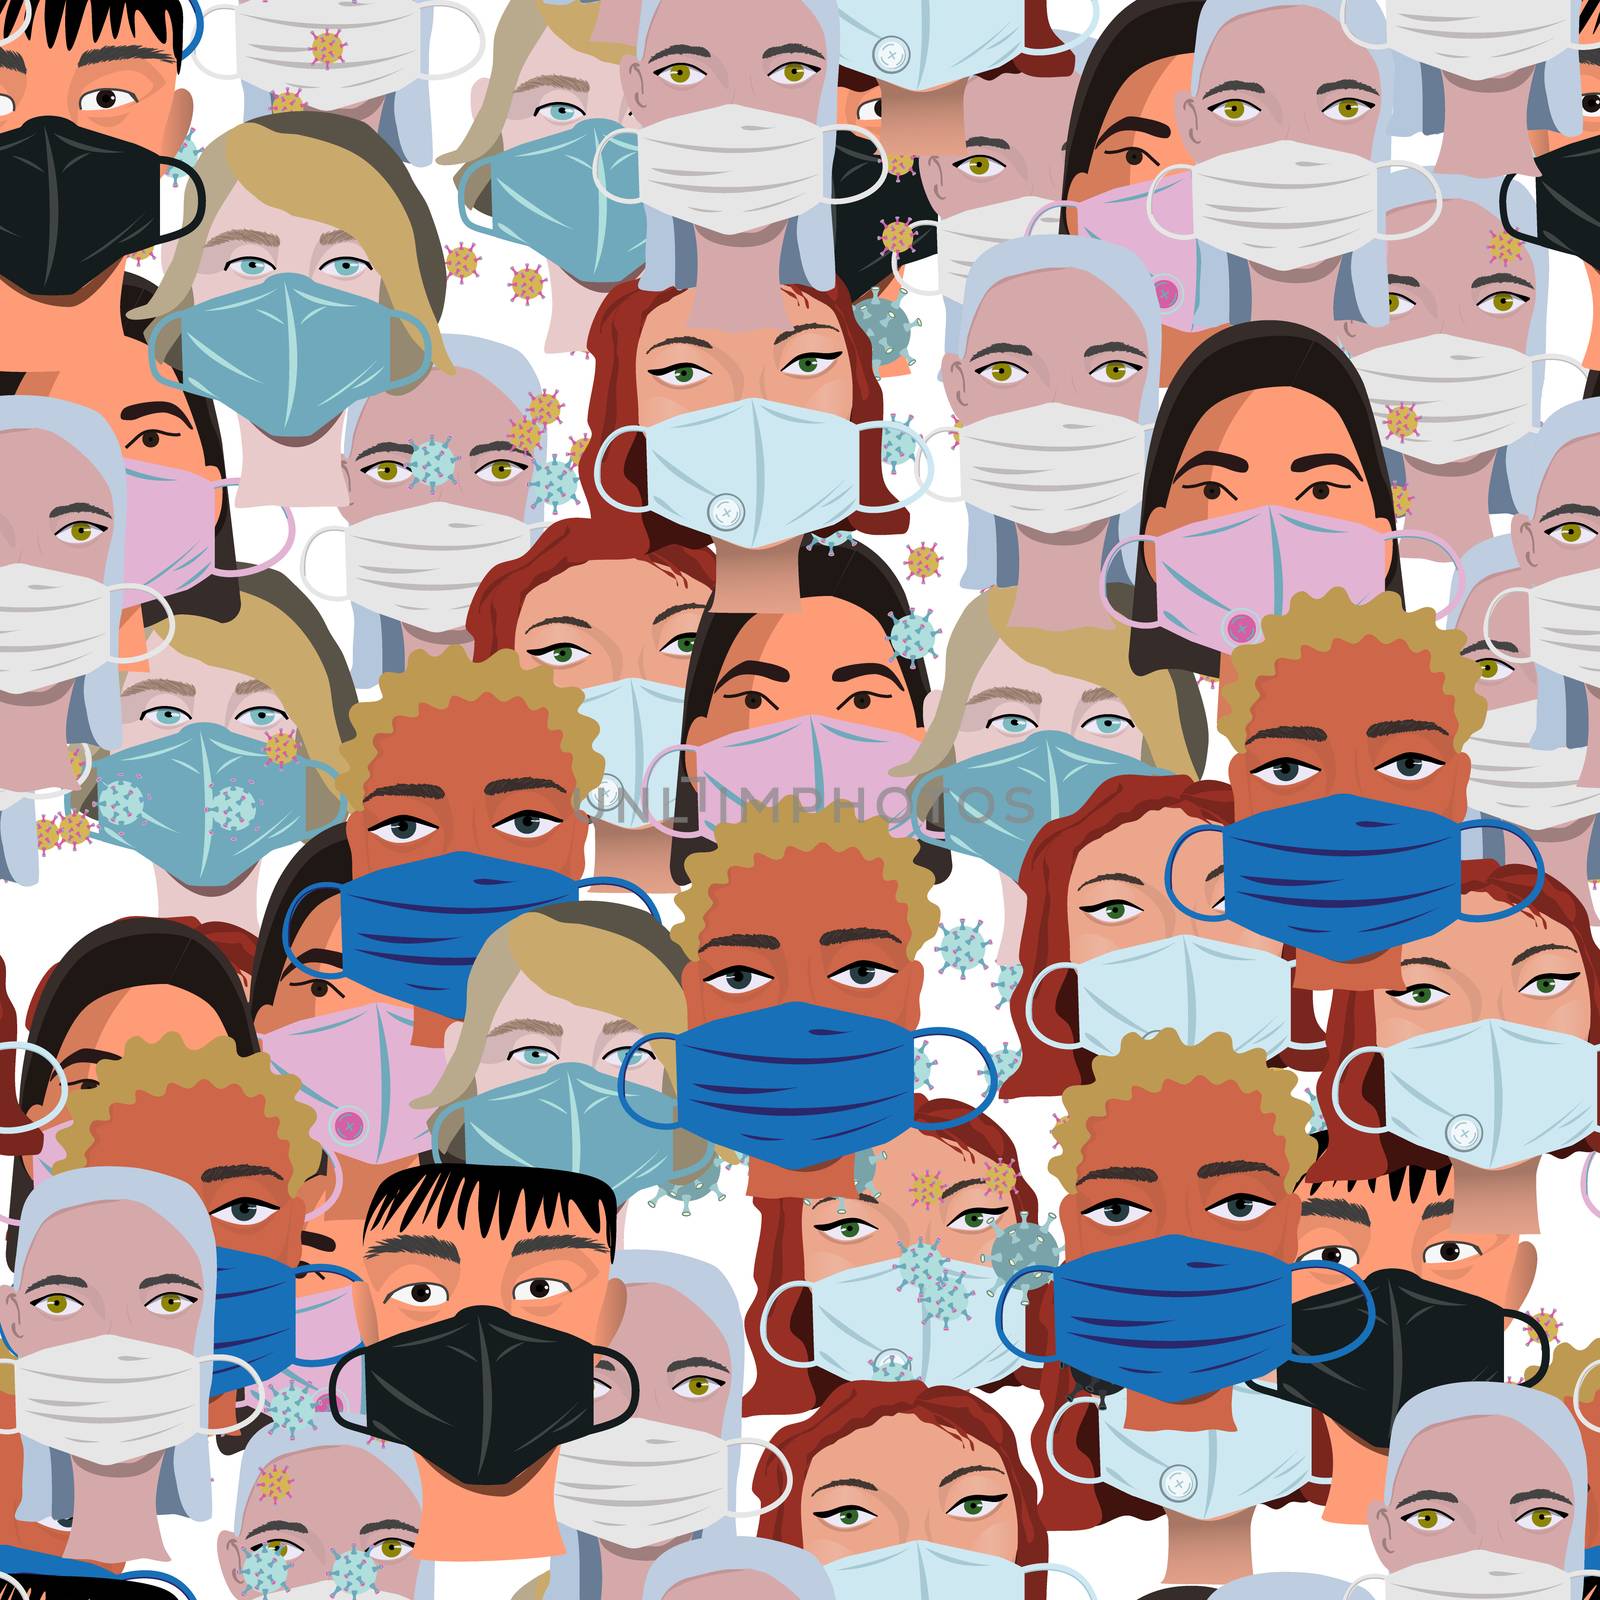 Endless pattern with multinationality faces wearing protective face mask. Latest trend news, fashion bloggers post. Flat cartoon illustration with copyspace on white background. Vector illustration.